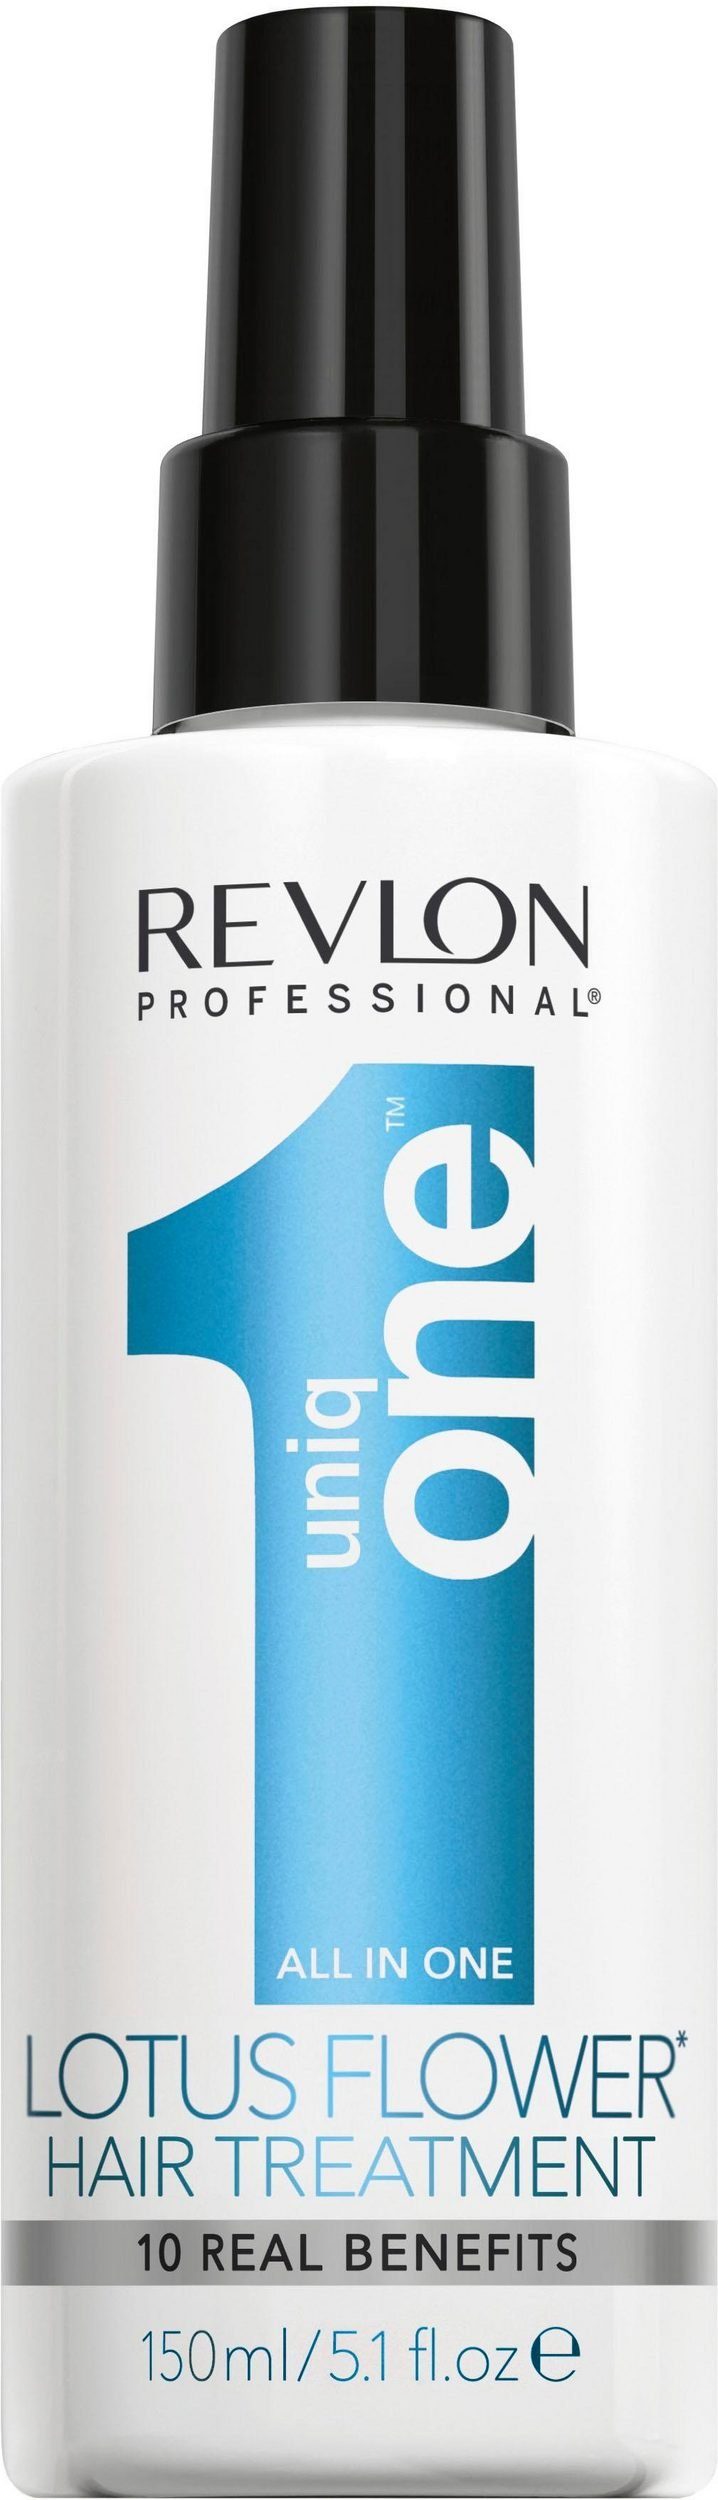 Leave-in Pflege Lotus Treatment REVLON PROFESSIONAL in One Hair Uniq Flower All one